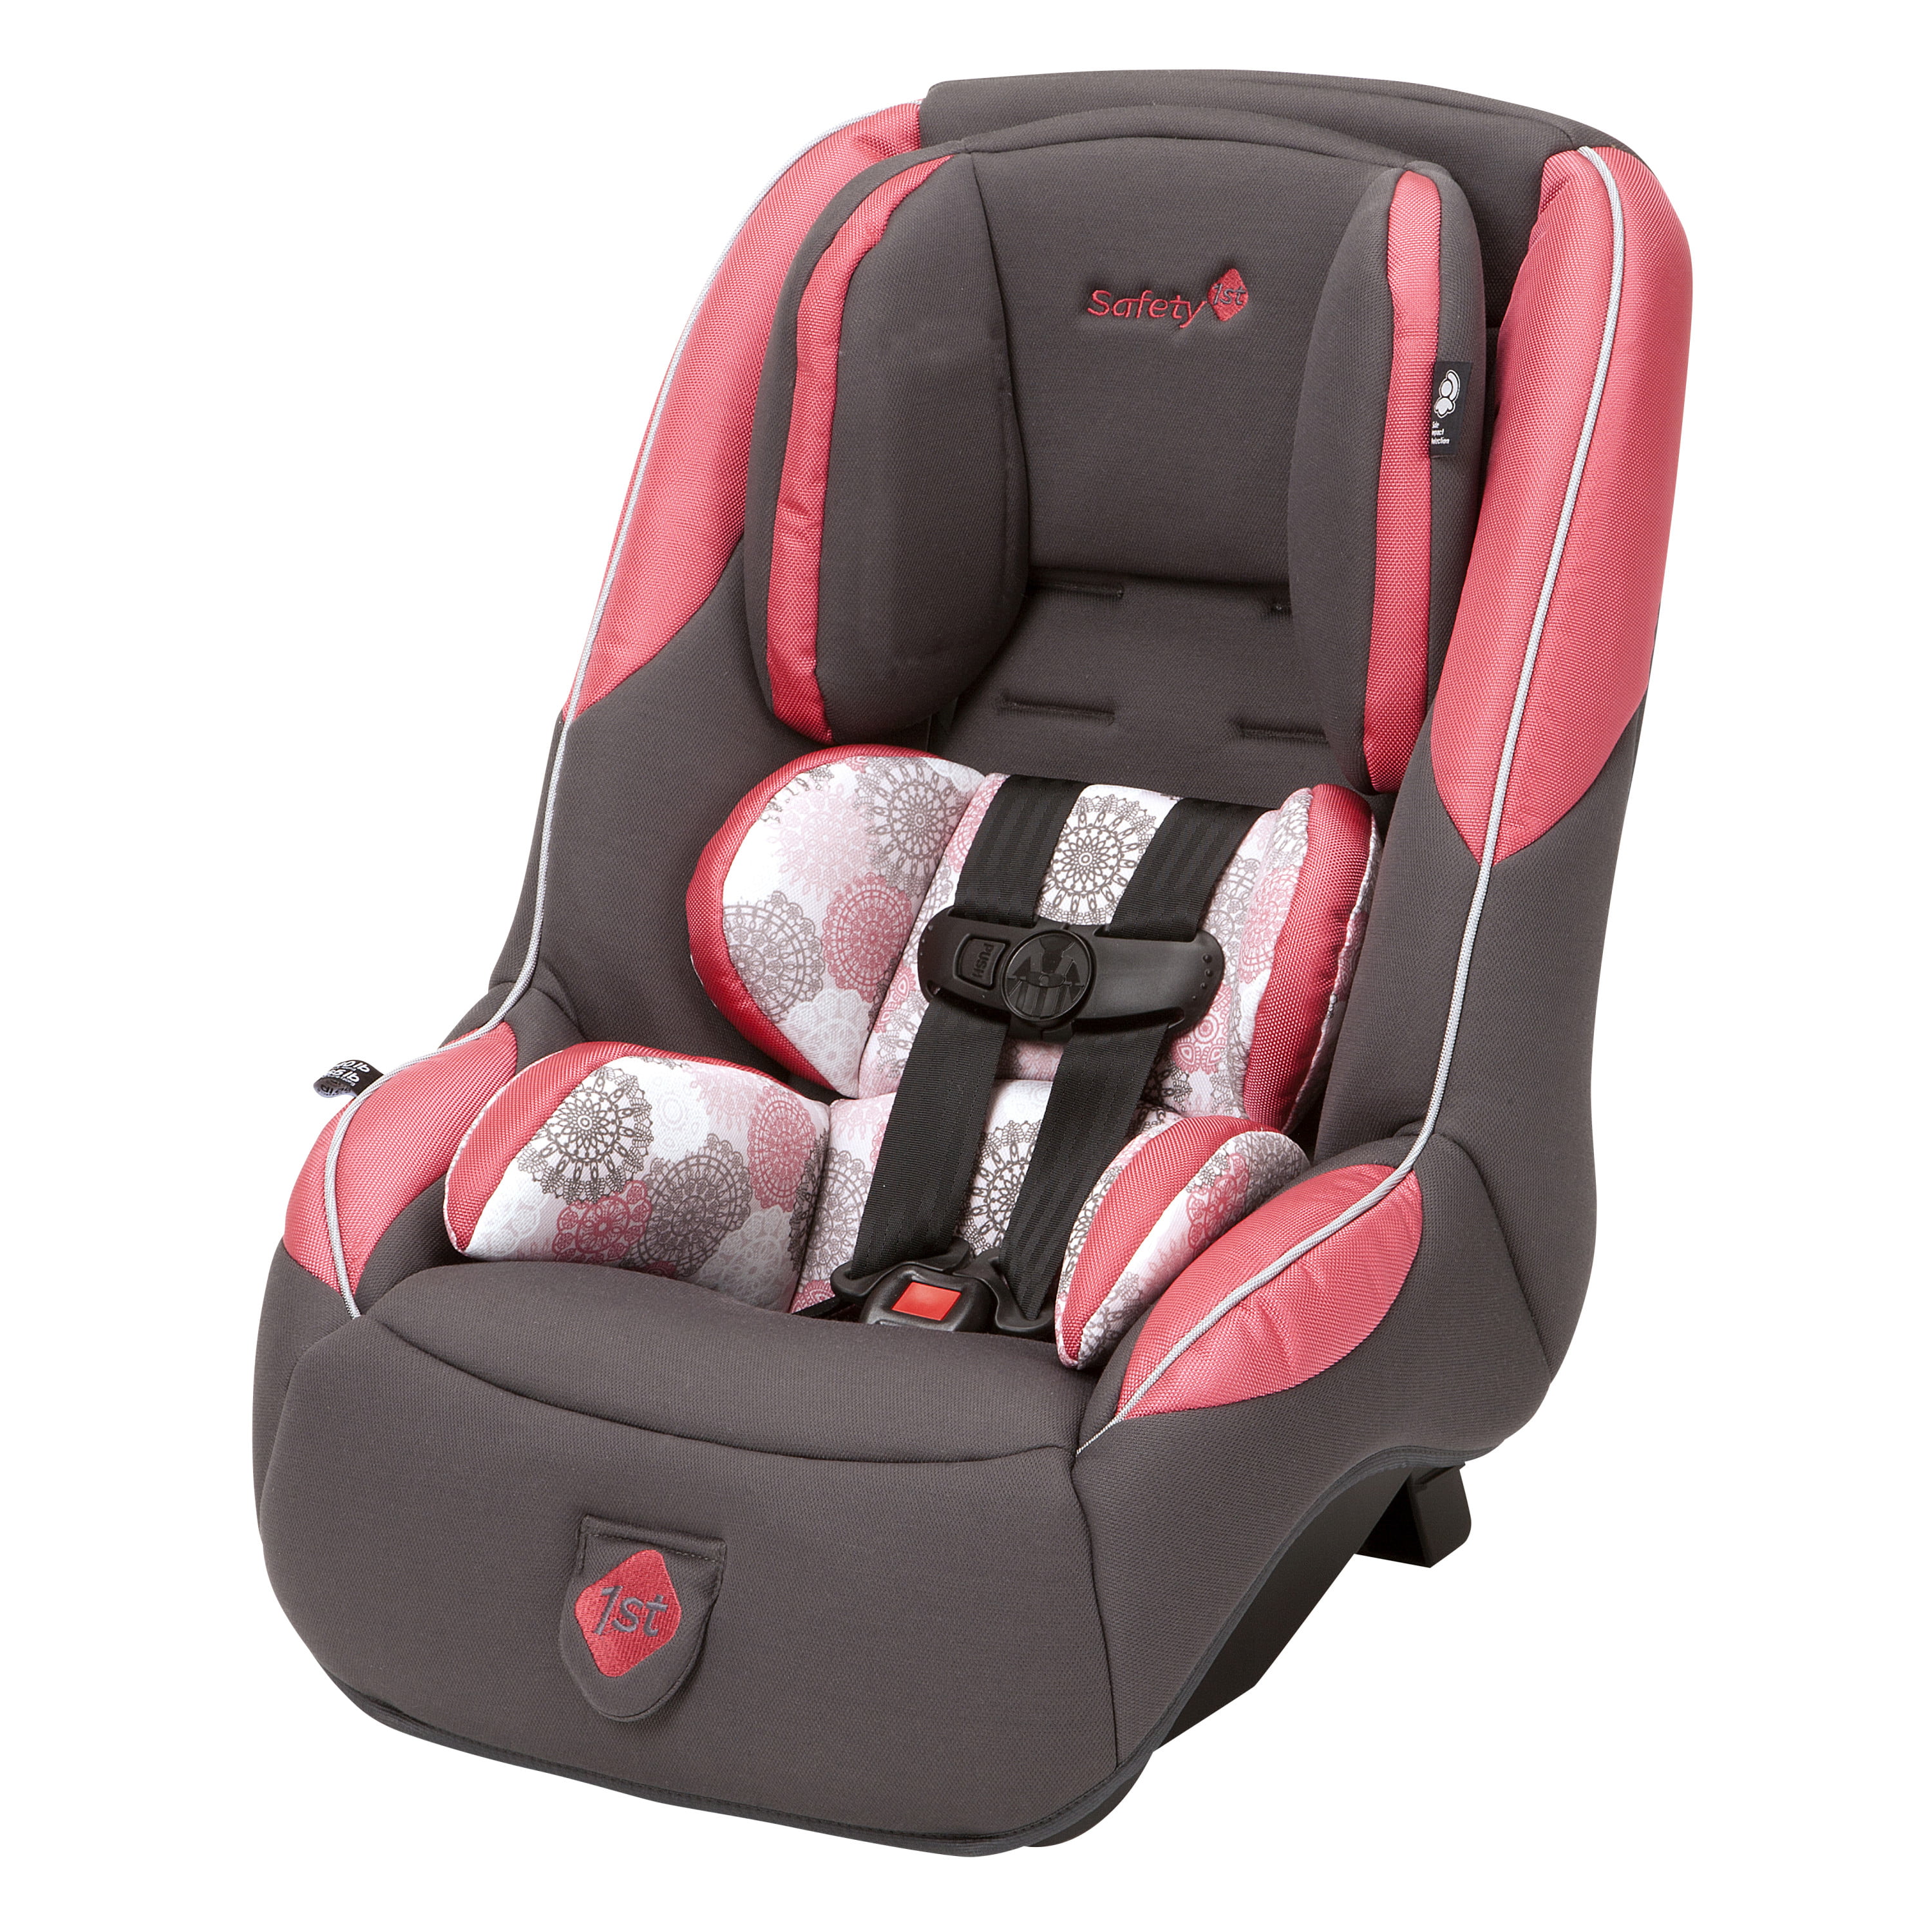 graco safety first car seat